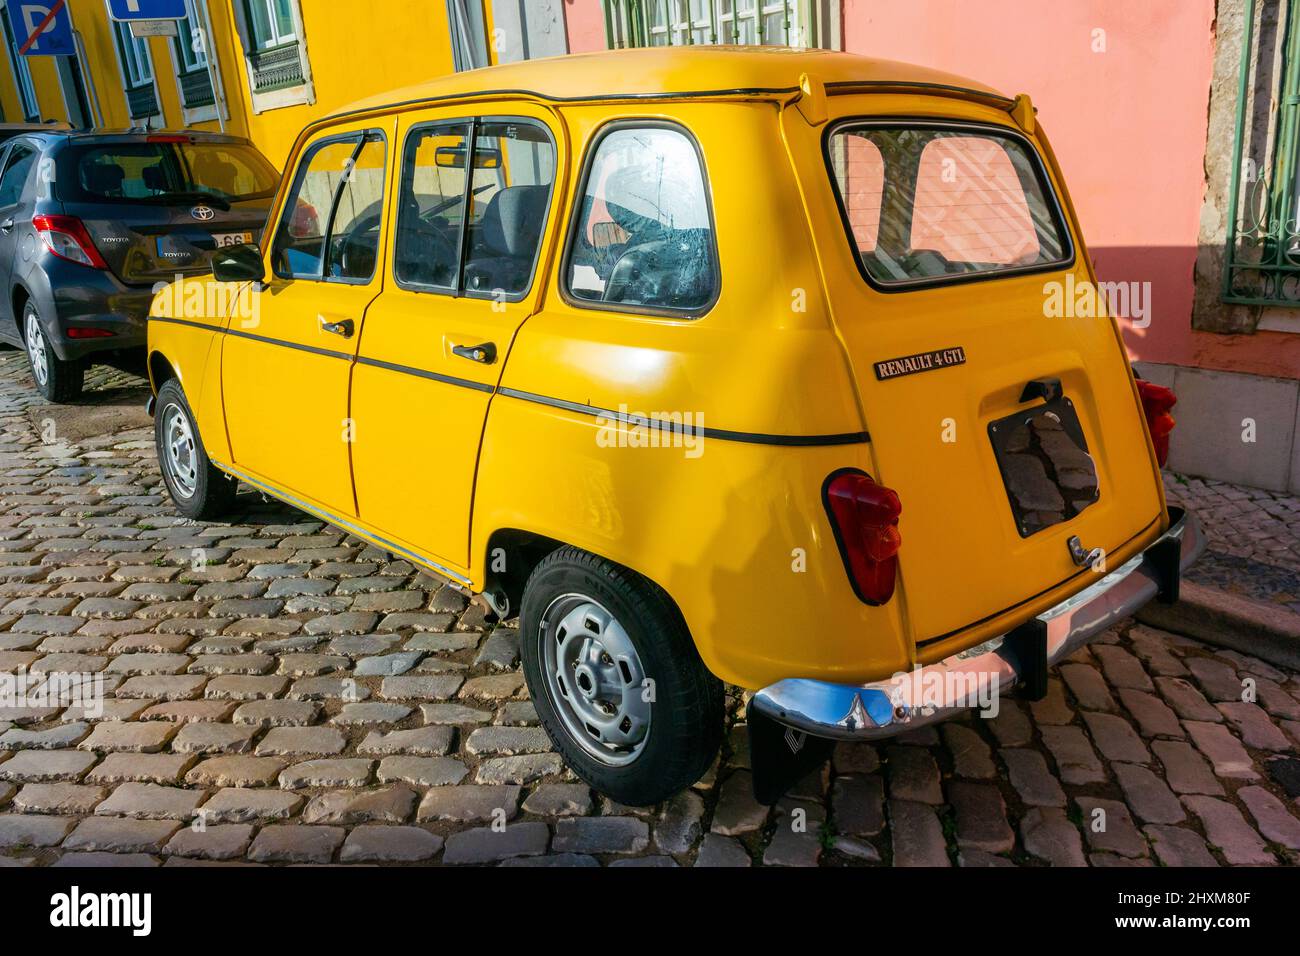 Faro, Portugal, Vintage, Classical Car parked, Renault Car 4CV, Street Scenes, Rear View, french cars retro Stock Photo